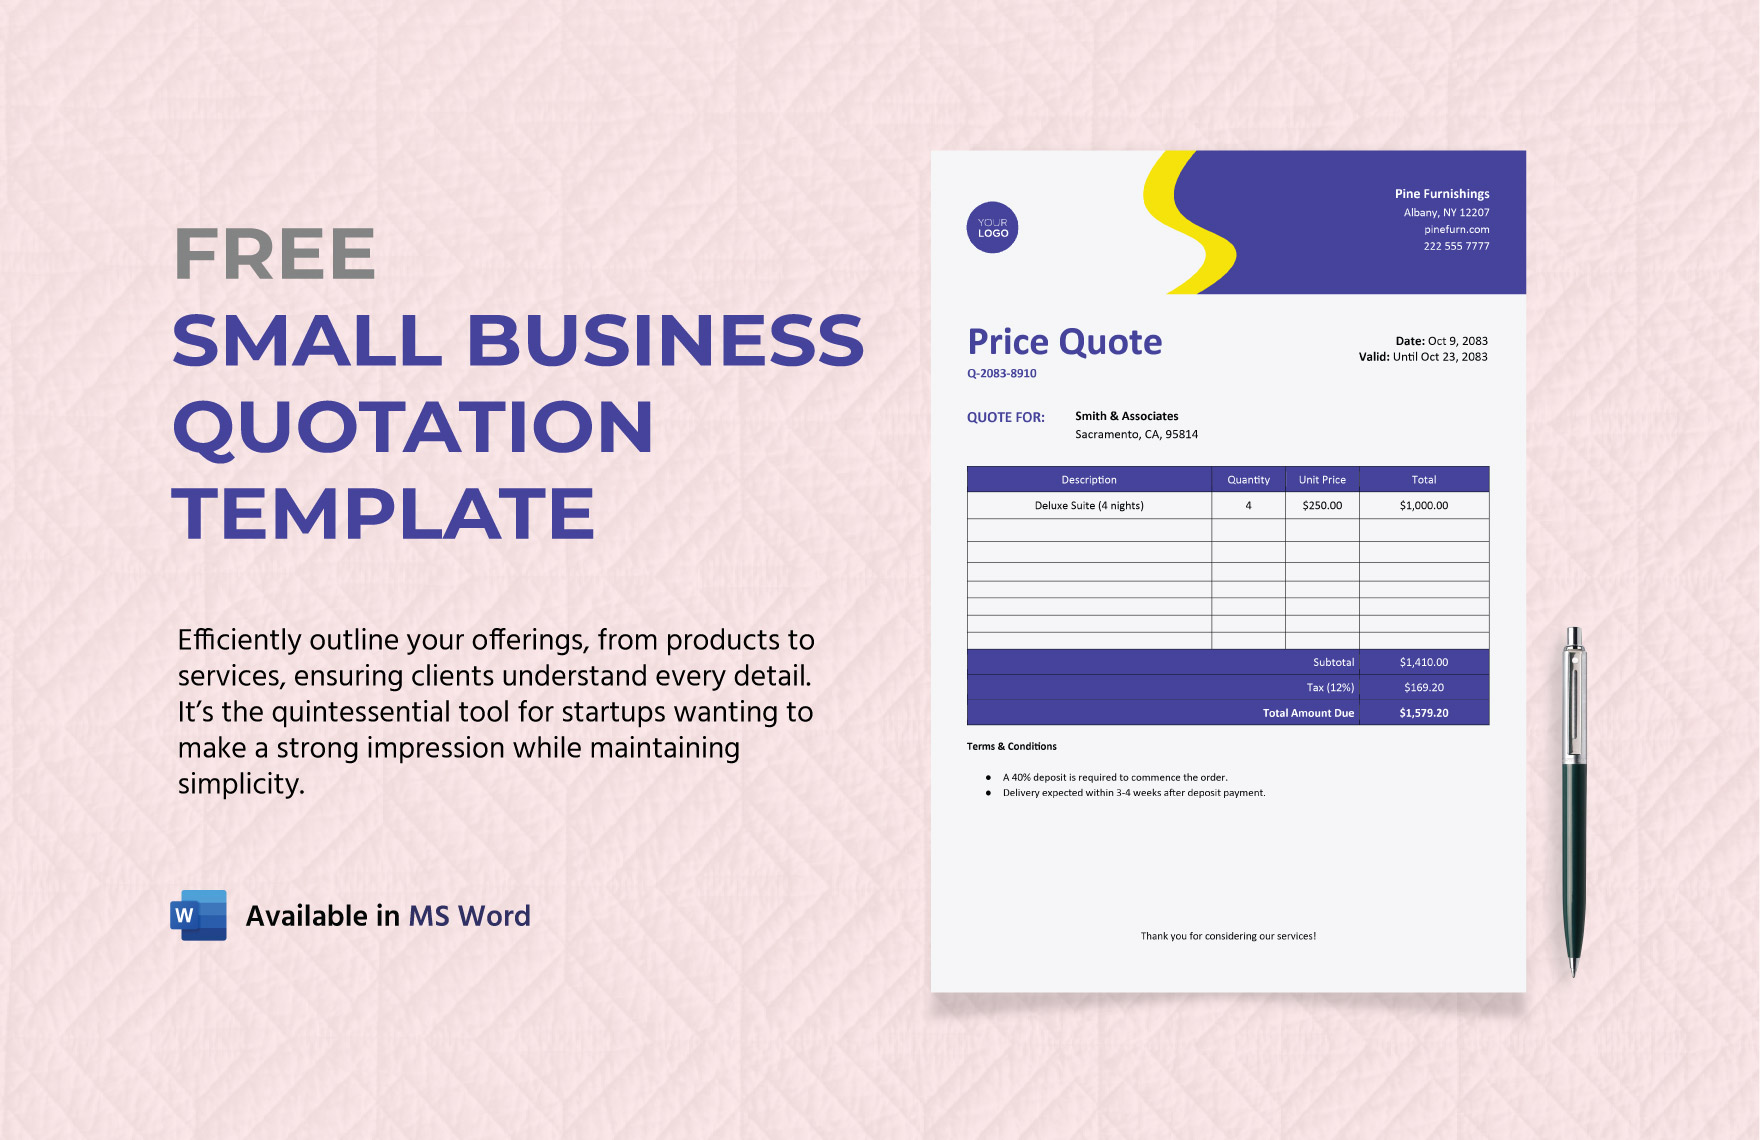 Free Small Business Quotation Template in Word